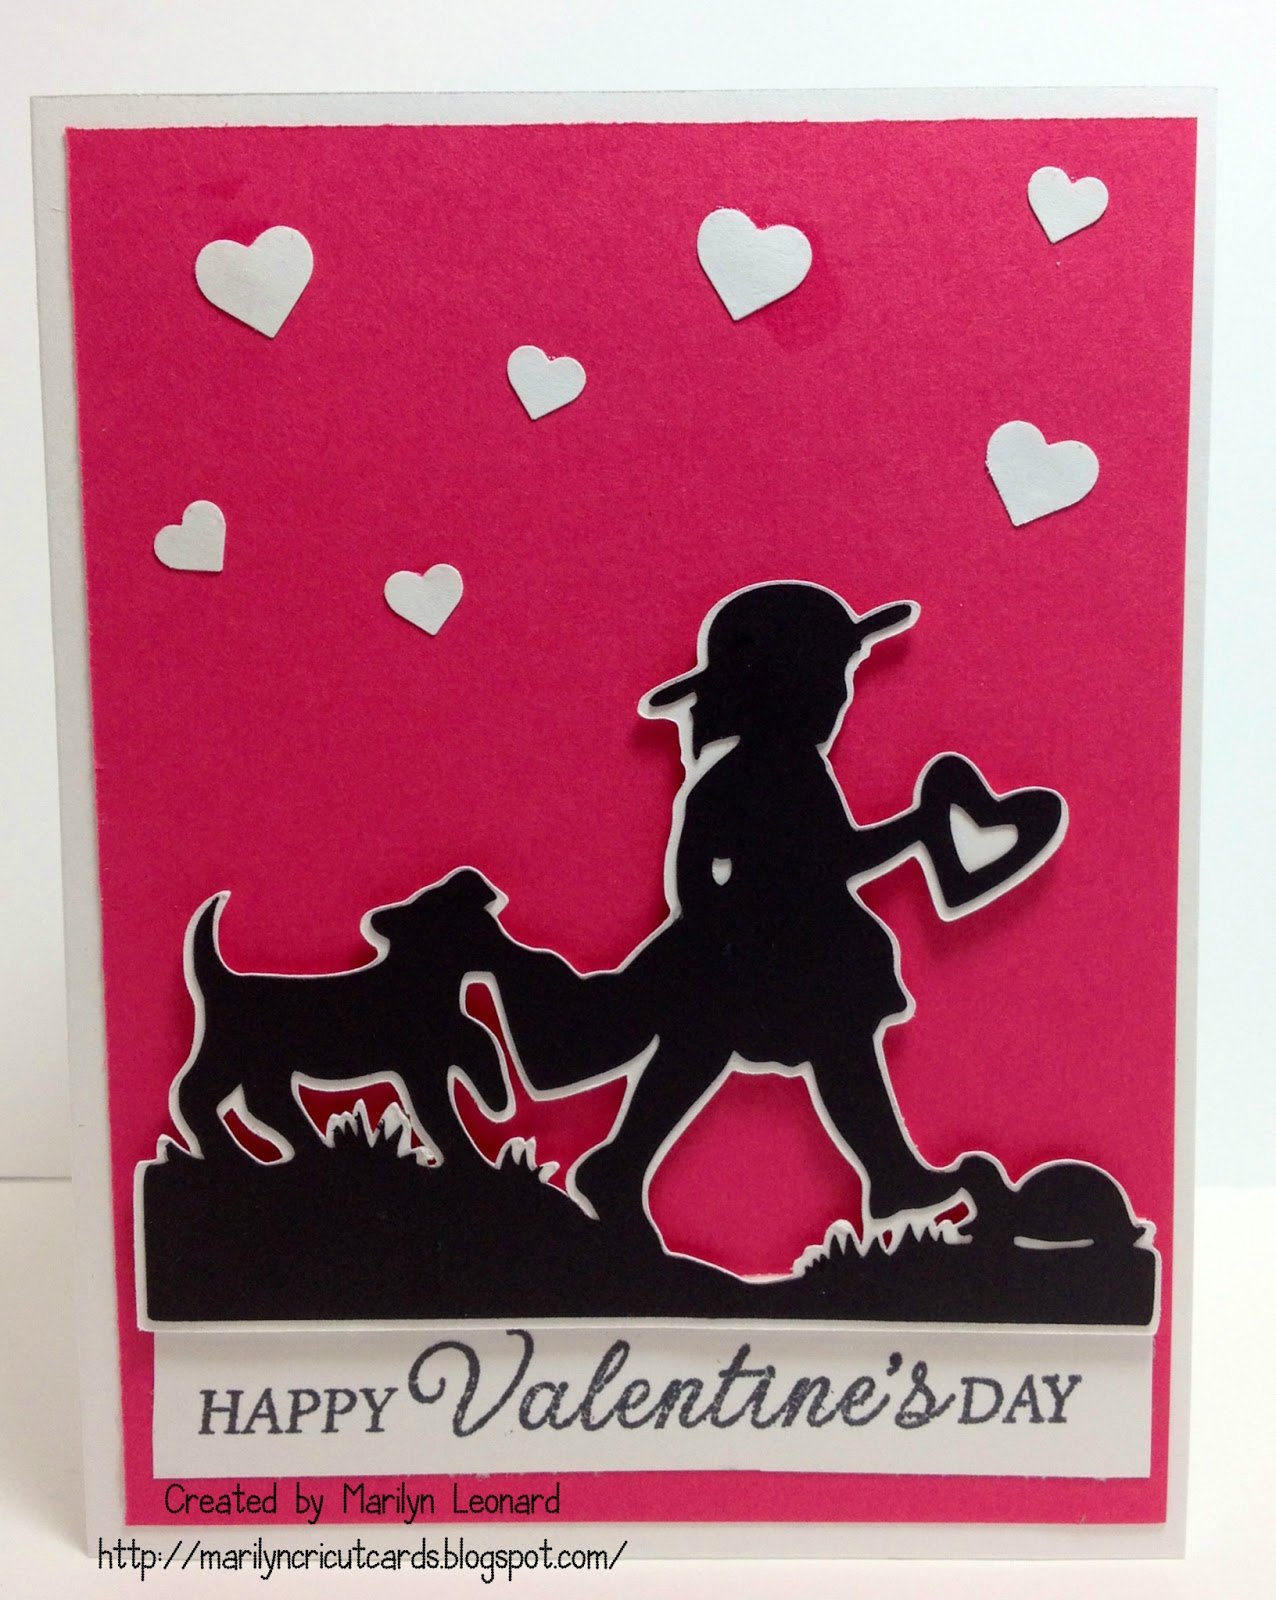 ~ Marilyn's Cricut Cards ~: Happy Valentine's Day